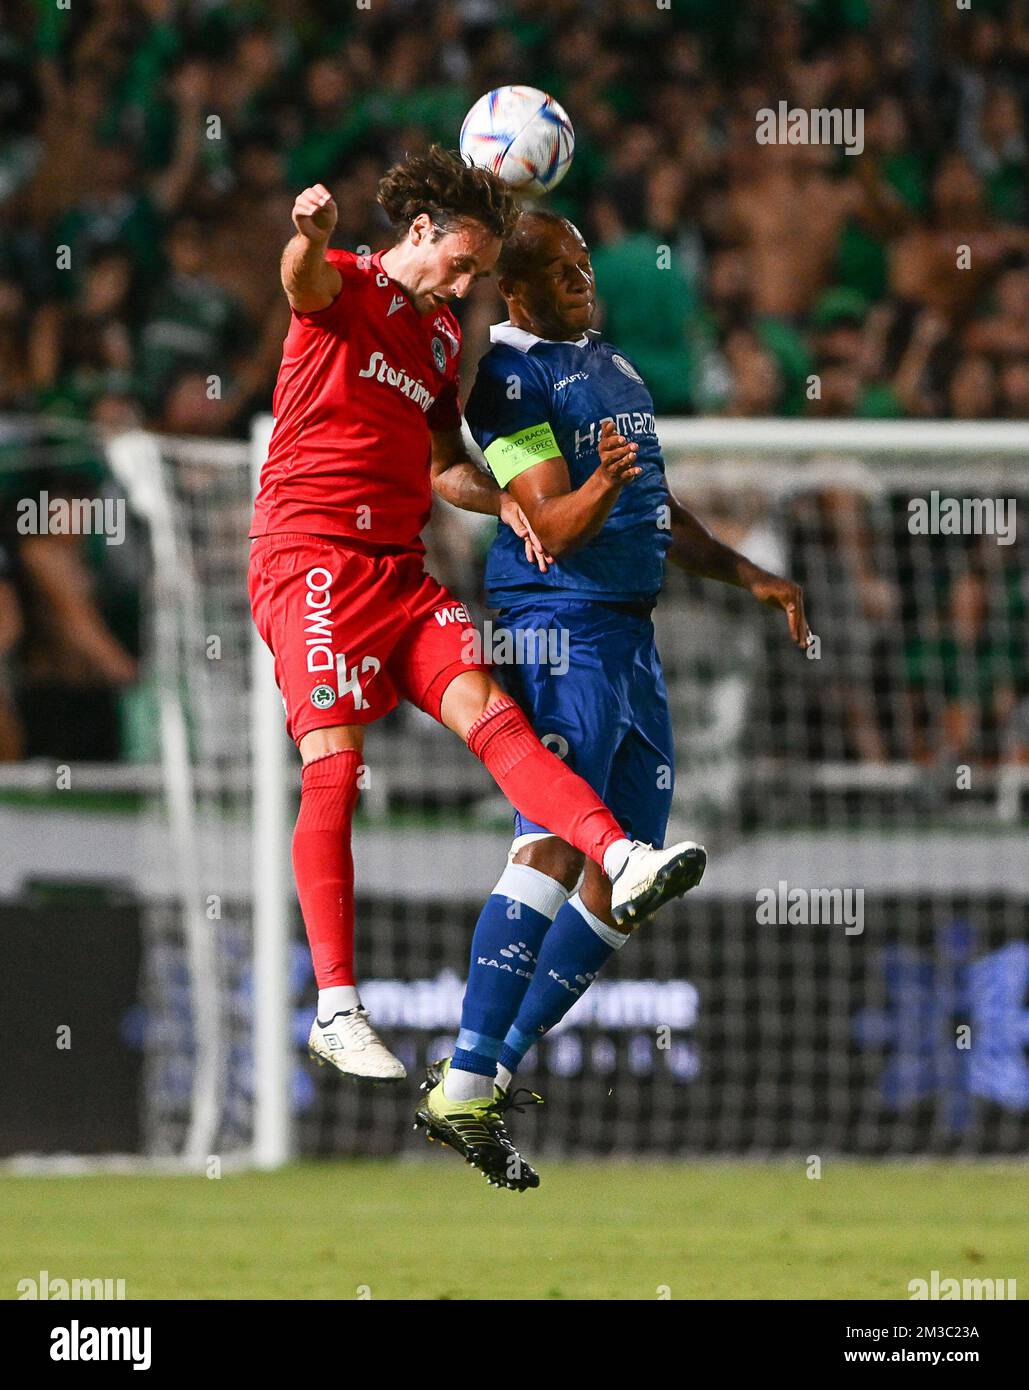 Omonia's Mix Diskerud and Gent's Vadis Odjidja-Ofoe fight for the ball during a soccer game between Cypriot Omonia Nicosia and Belgian KAA Gent in Nicosia, Cyprus on Thursday 25 August 2022, the return leg of the play-offs for the UEFA Europa League competition. BELGA PHOTO DAVID CATRY Stock Photo